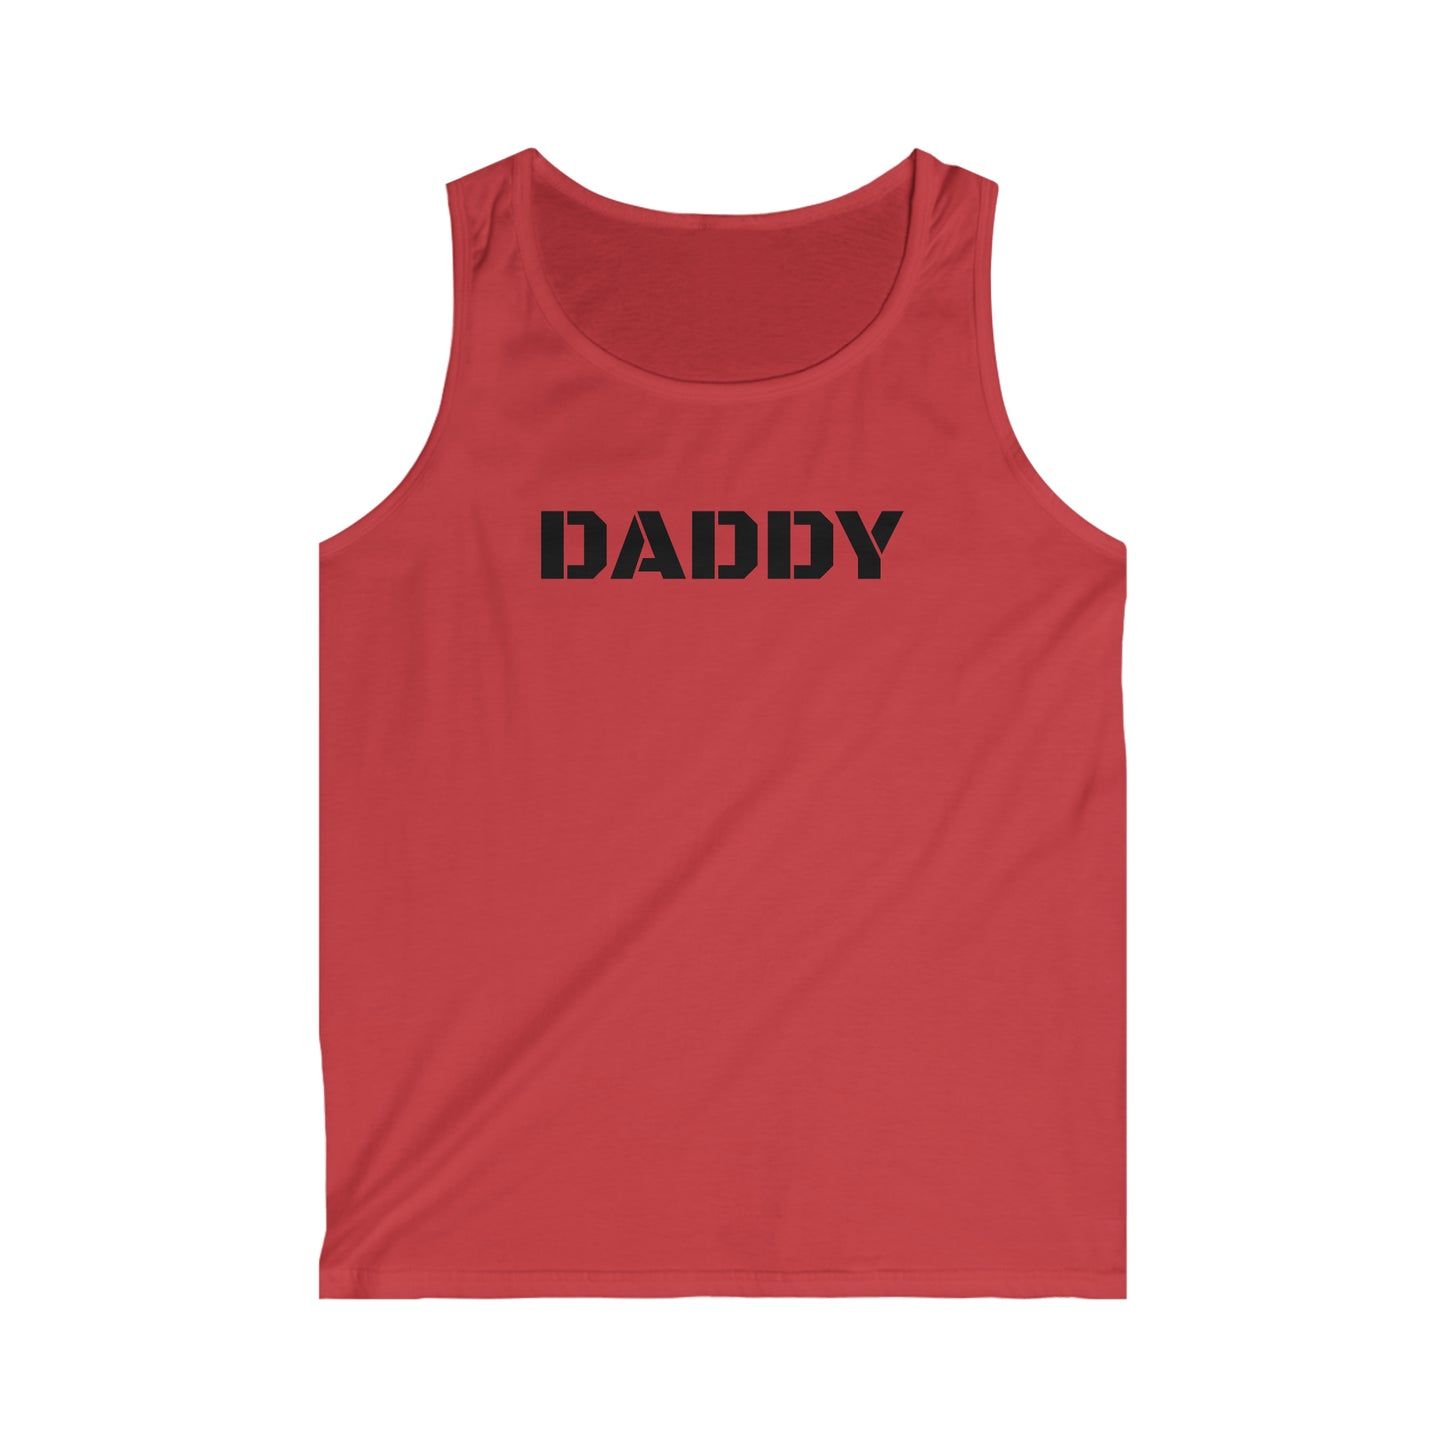 Men's Softstyle Tank Top- GYM DADDY